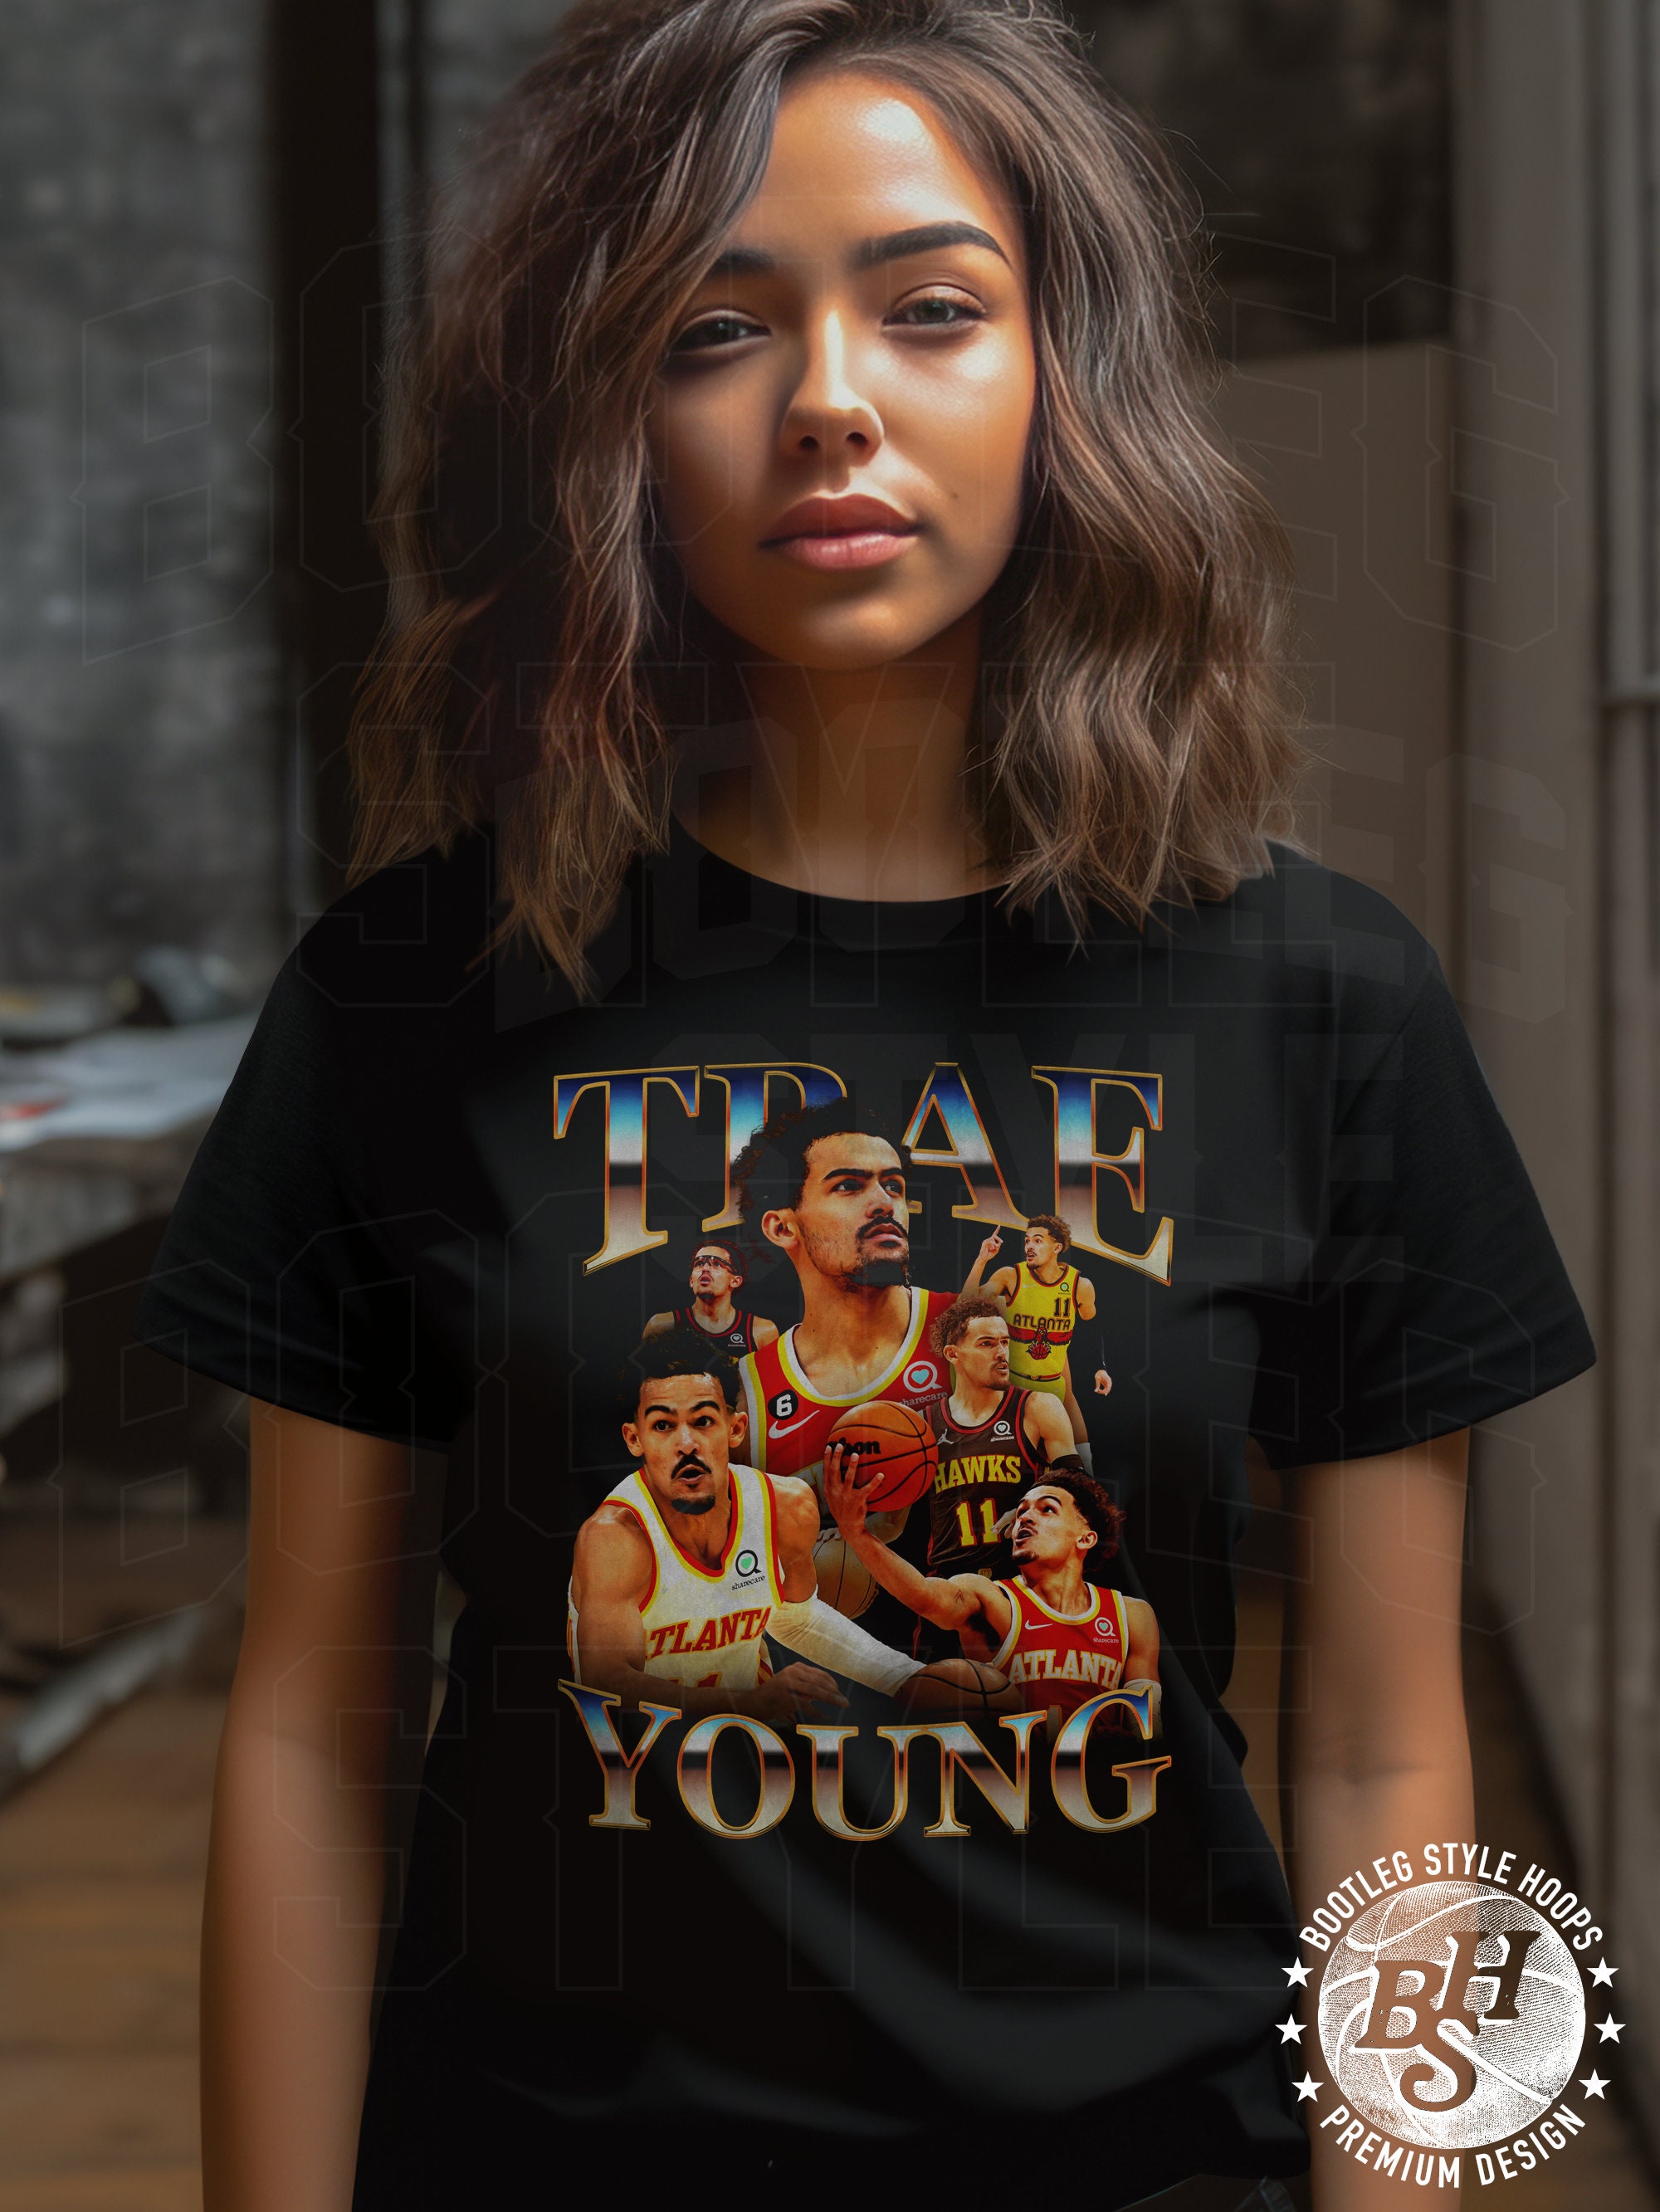 ShirtcieCA Vintage Trae Young Tshirt - Trae Young Vintage Bootleg Classic Graphic T-Shirt - Gift for Women and Men Unisex T-Shirt